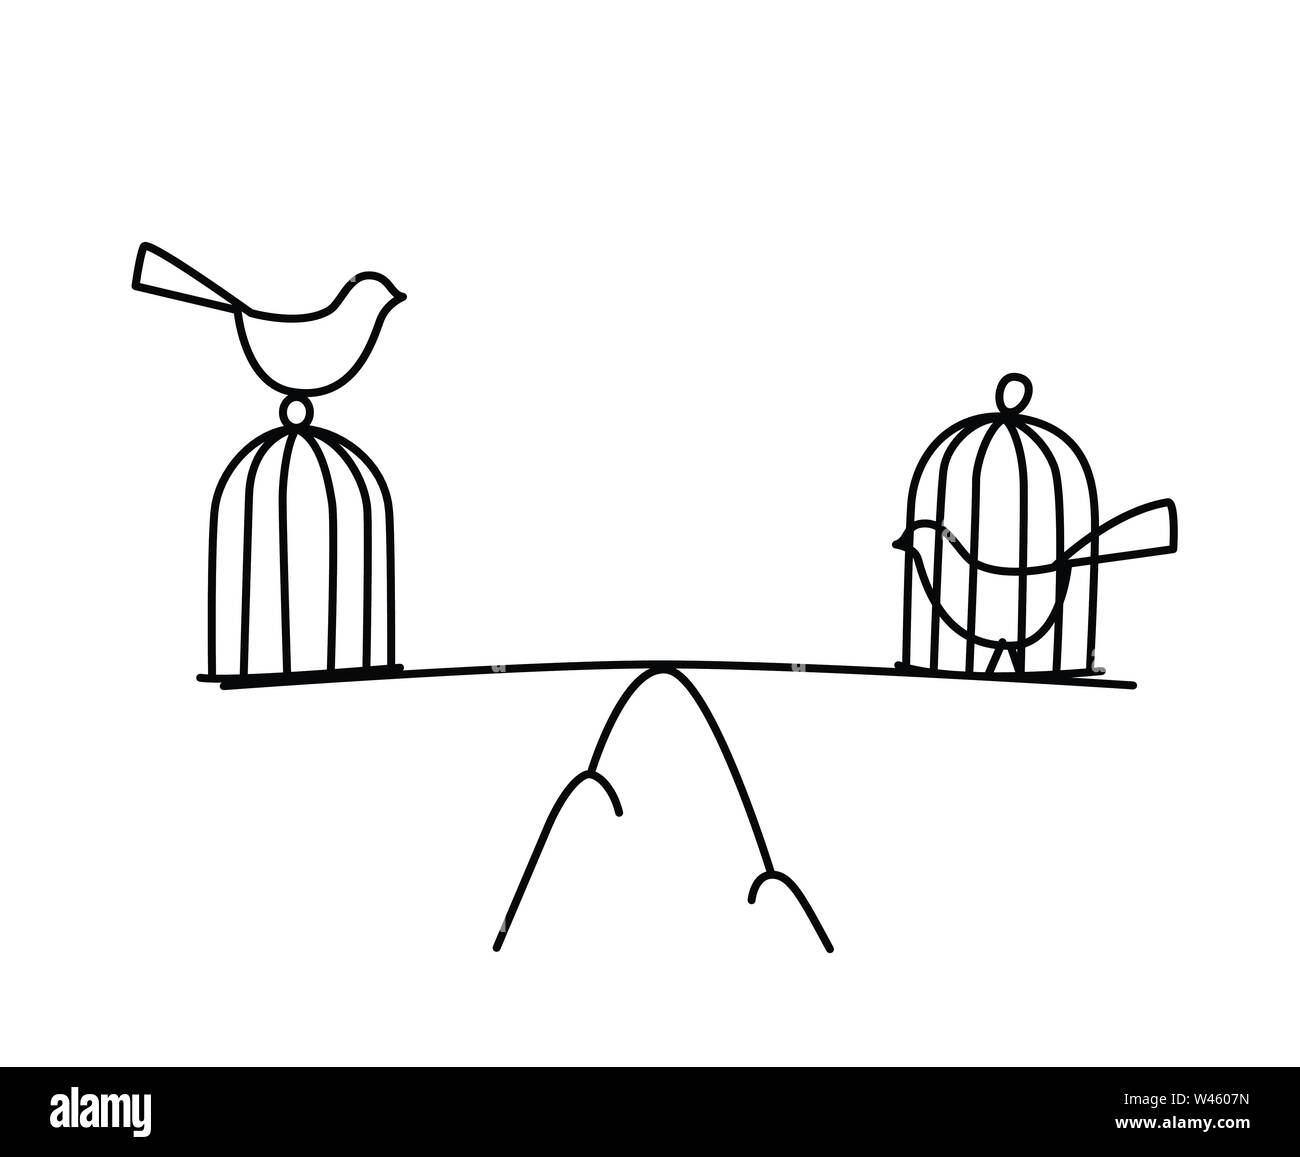 Illustration of a bird in a cage and at large. Vector. Freedom and prison. The balance between freedom and imprisonment. Metaphor. Linear style. Illus Stock Vector